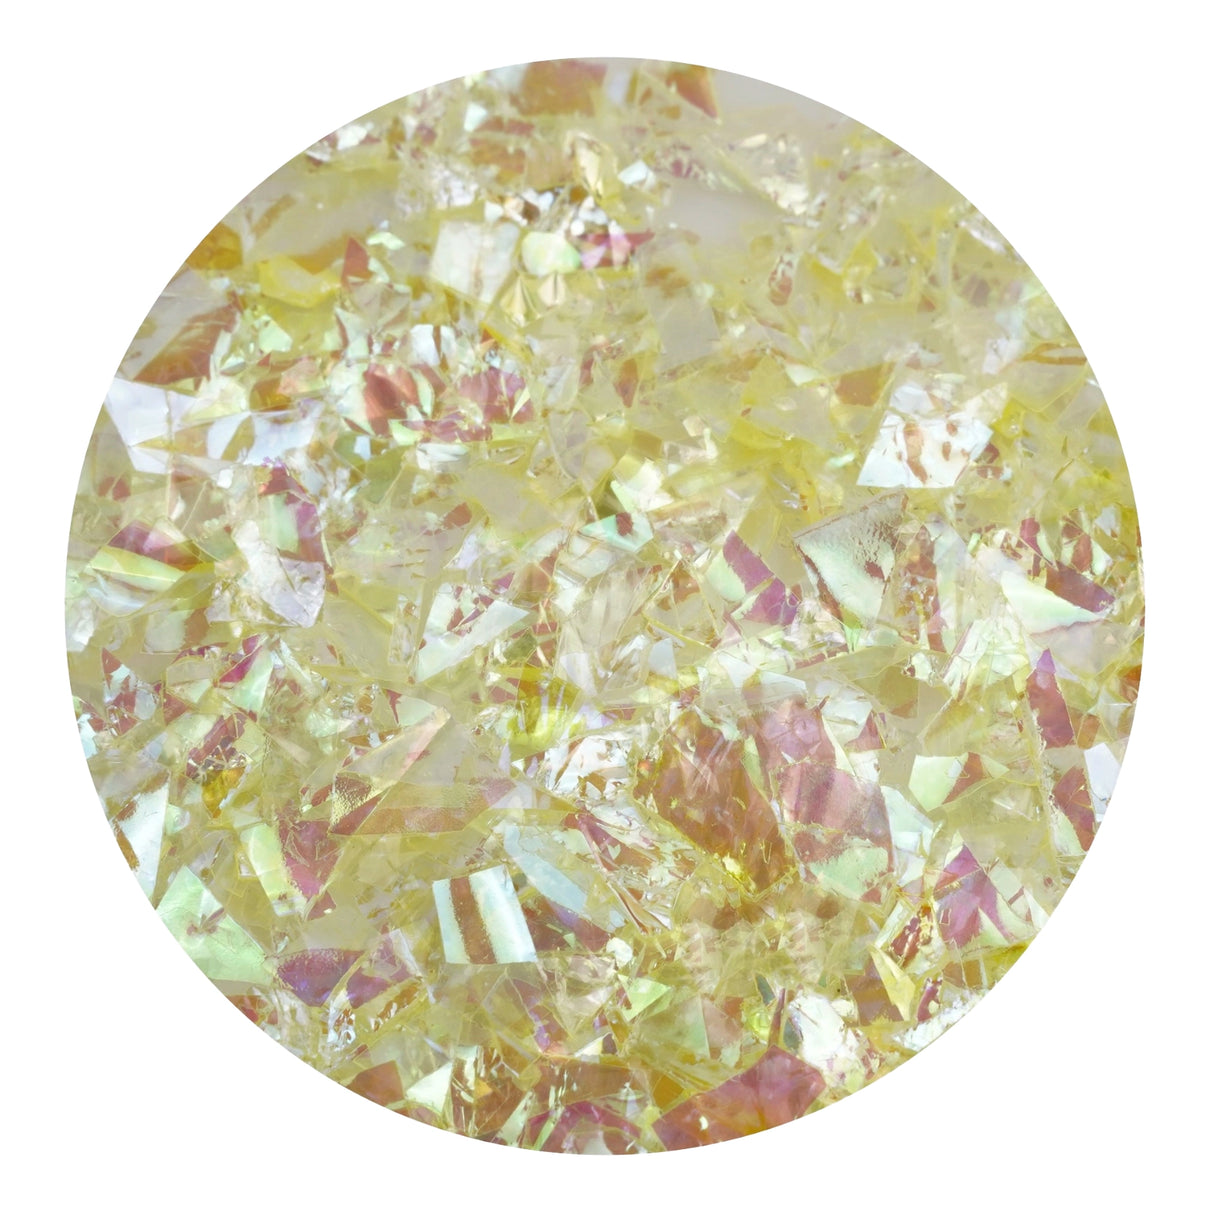 Iridescent Fractured Flakes - Light Yellow